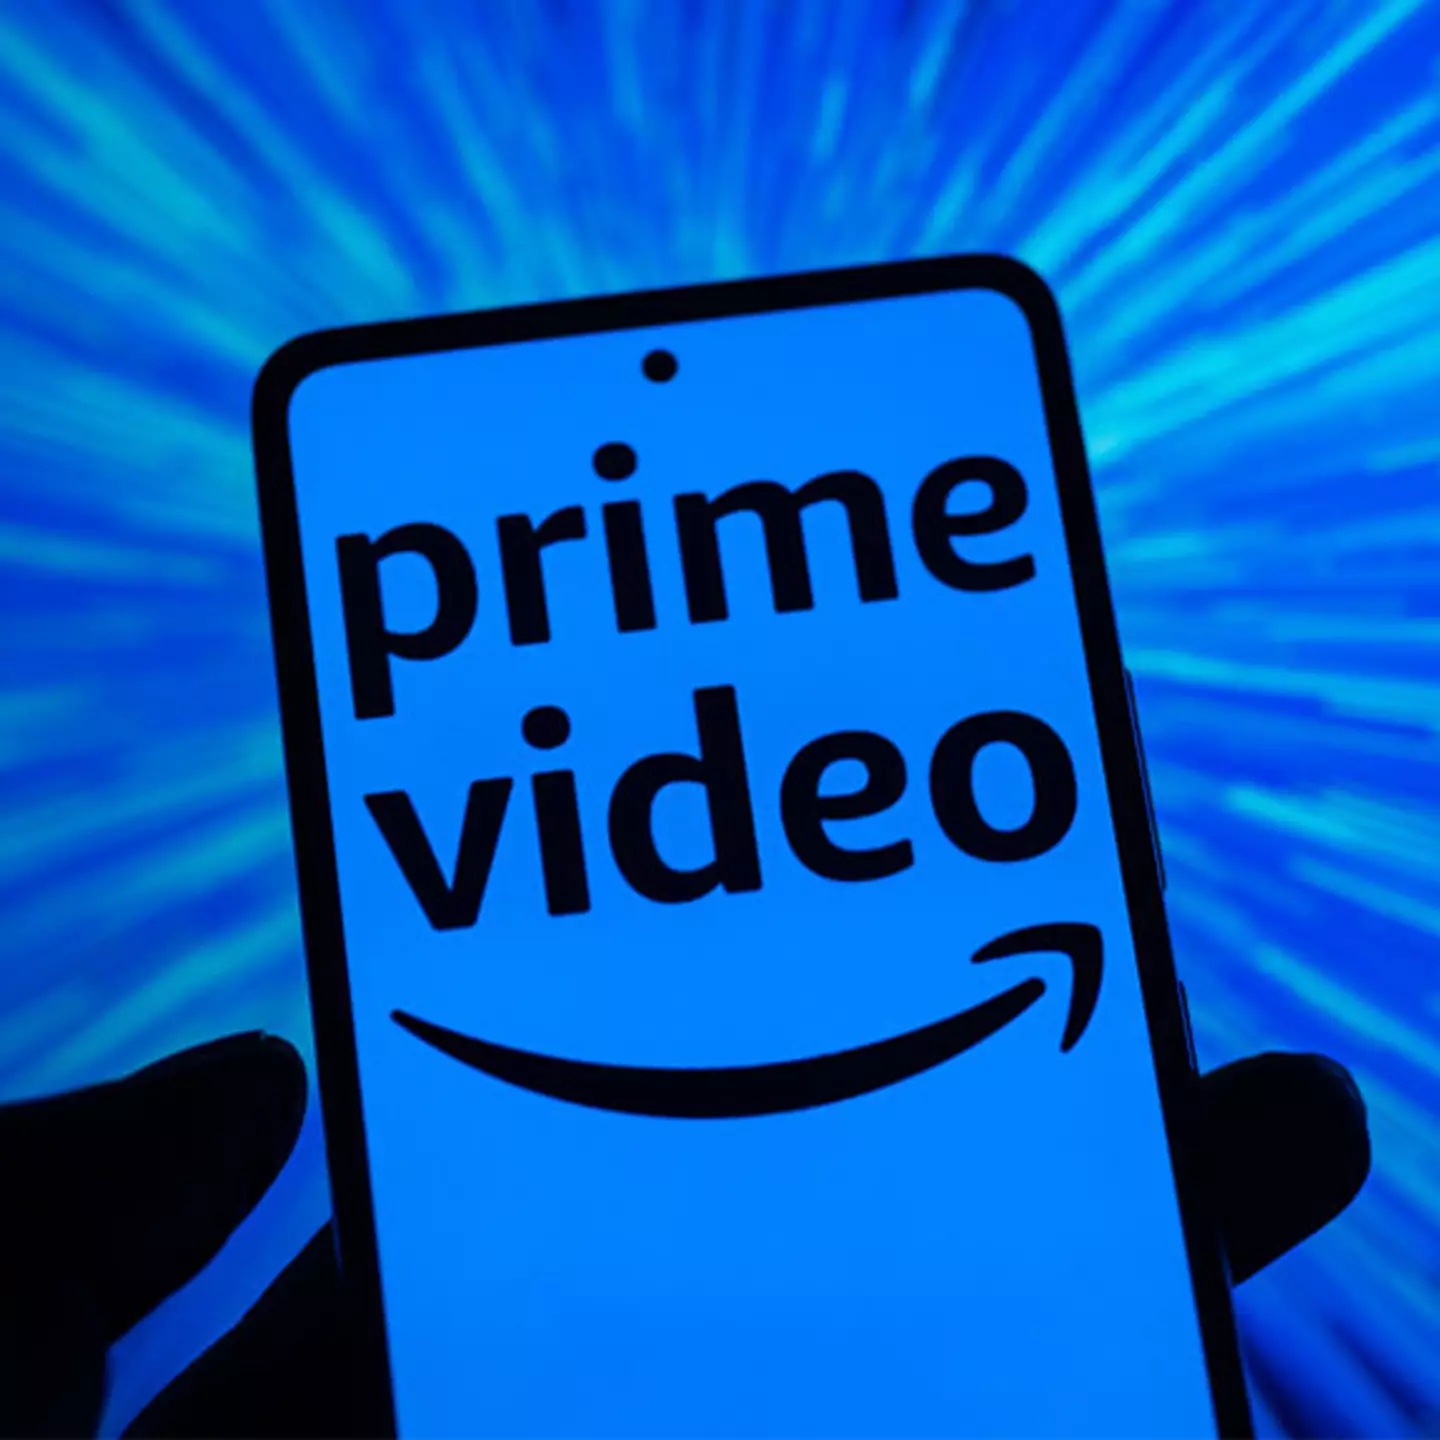 Amazon reveal start date for ads on Prime Video streaming service